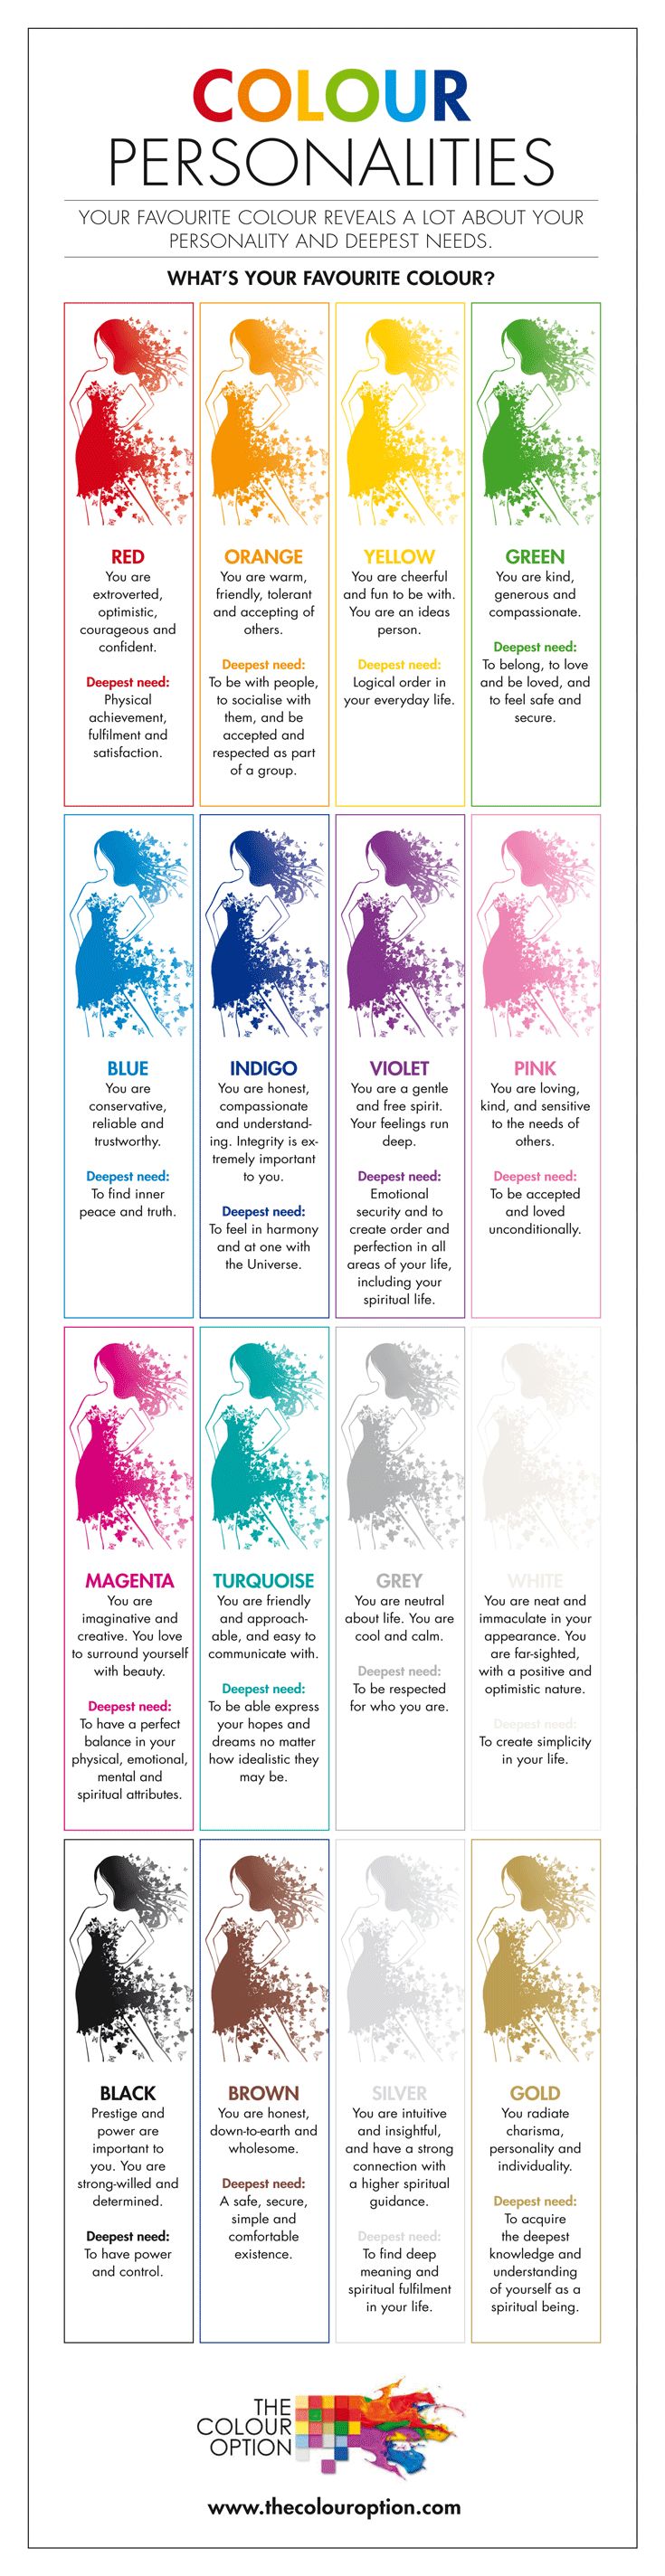 1530383460_884_Marketing-Infographic-Looking-for-a-color-personality-test-Name-your-favorite-color-and-in-seconds-y Marketing Infographic : Looking for a color personality test?  Check out this infographic. It takes just...